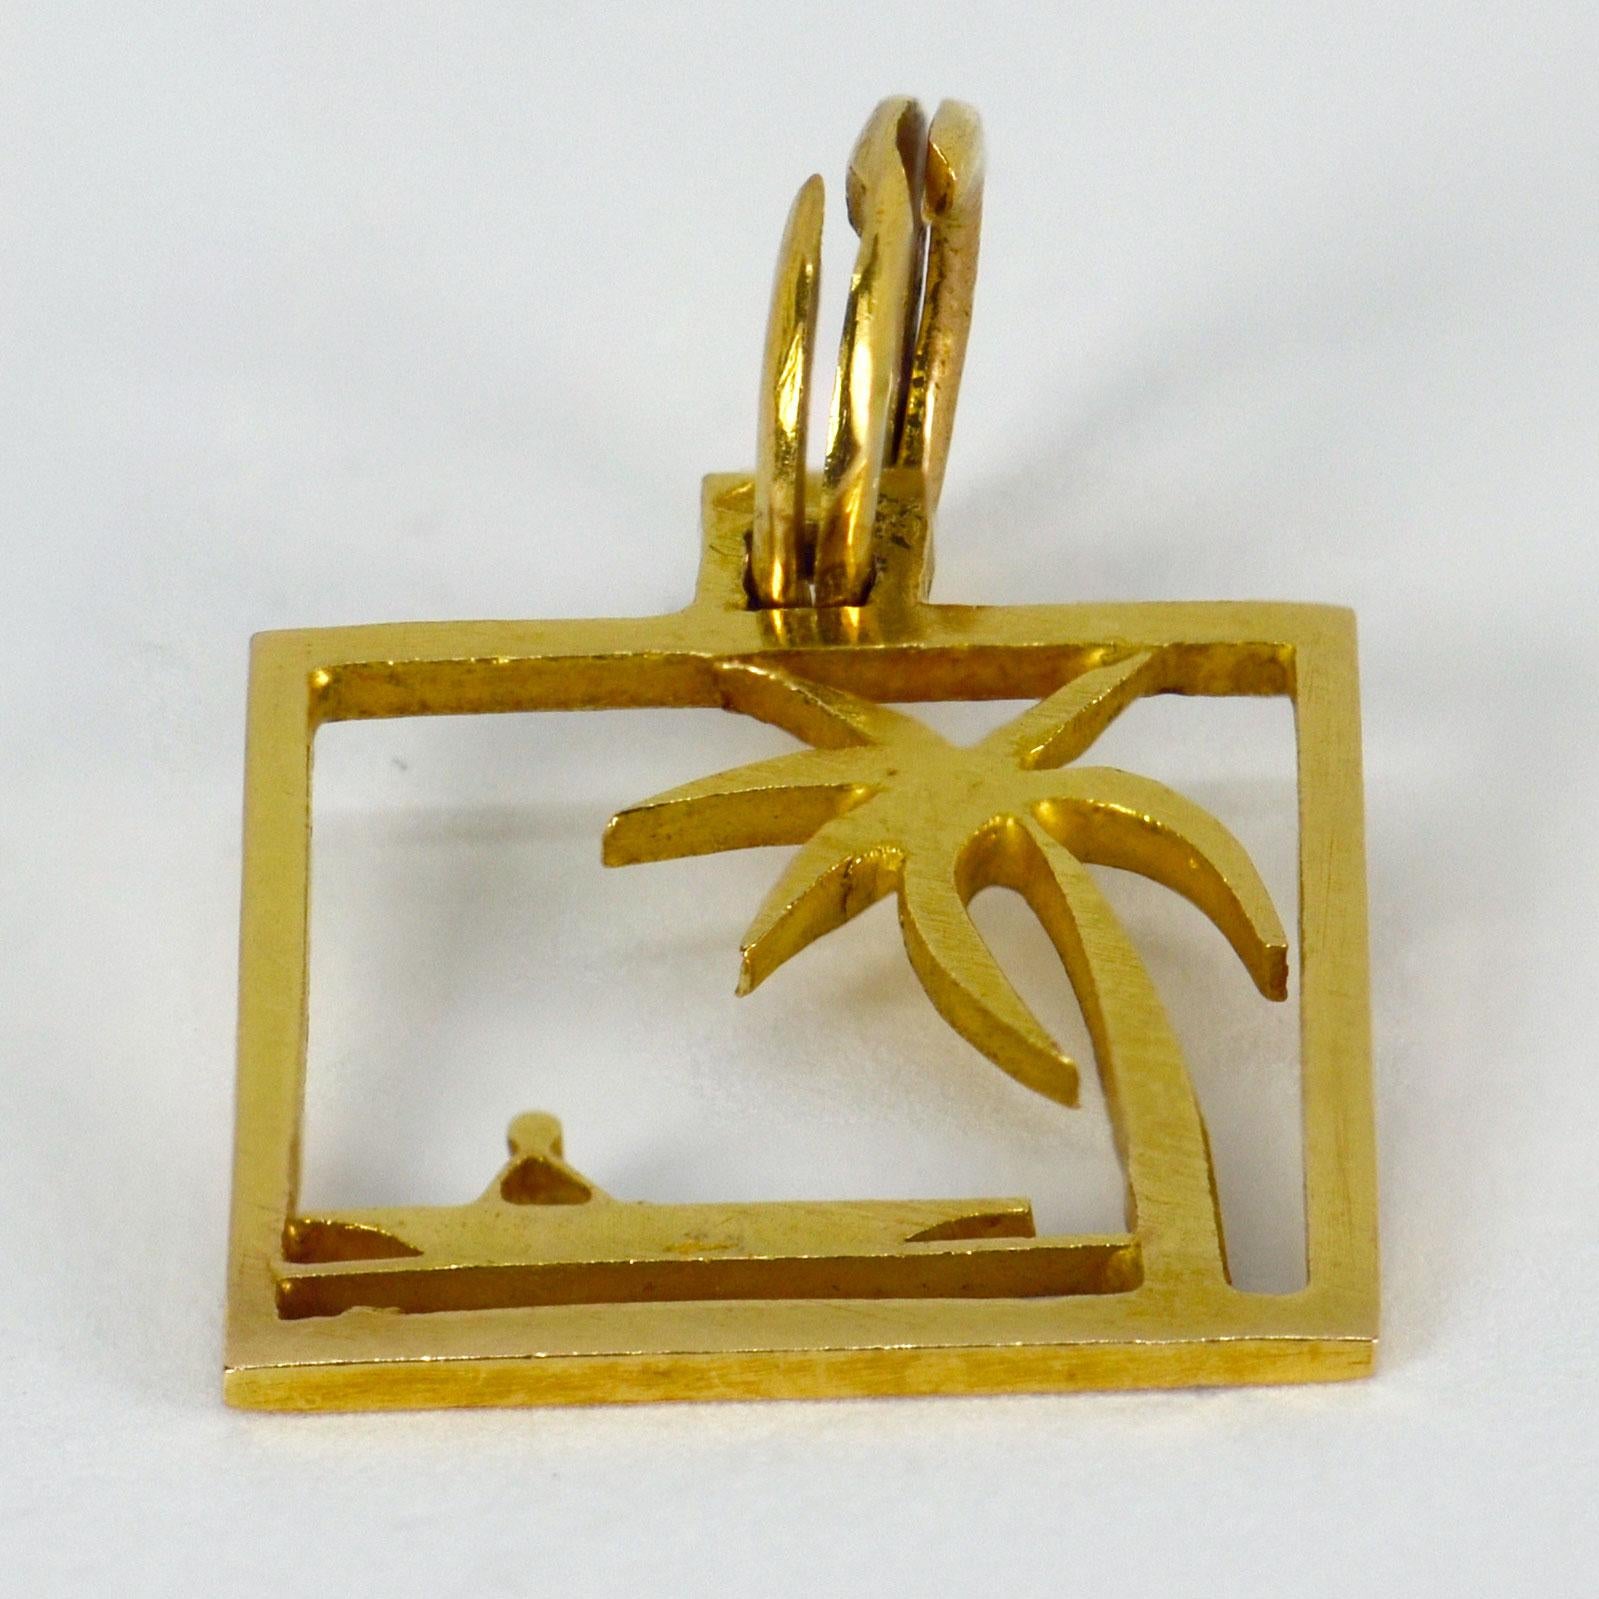 An 18 karat (18K)  yellow gold square charm pendant depicting a desert island palm tree and boat. Stamped with the owl mark for French import and 18 karat gold.

Dimensions: 1.8 x 1.5 x 0.1 cm (not including jump ring)
Weight: 1.70 grams
